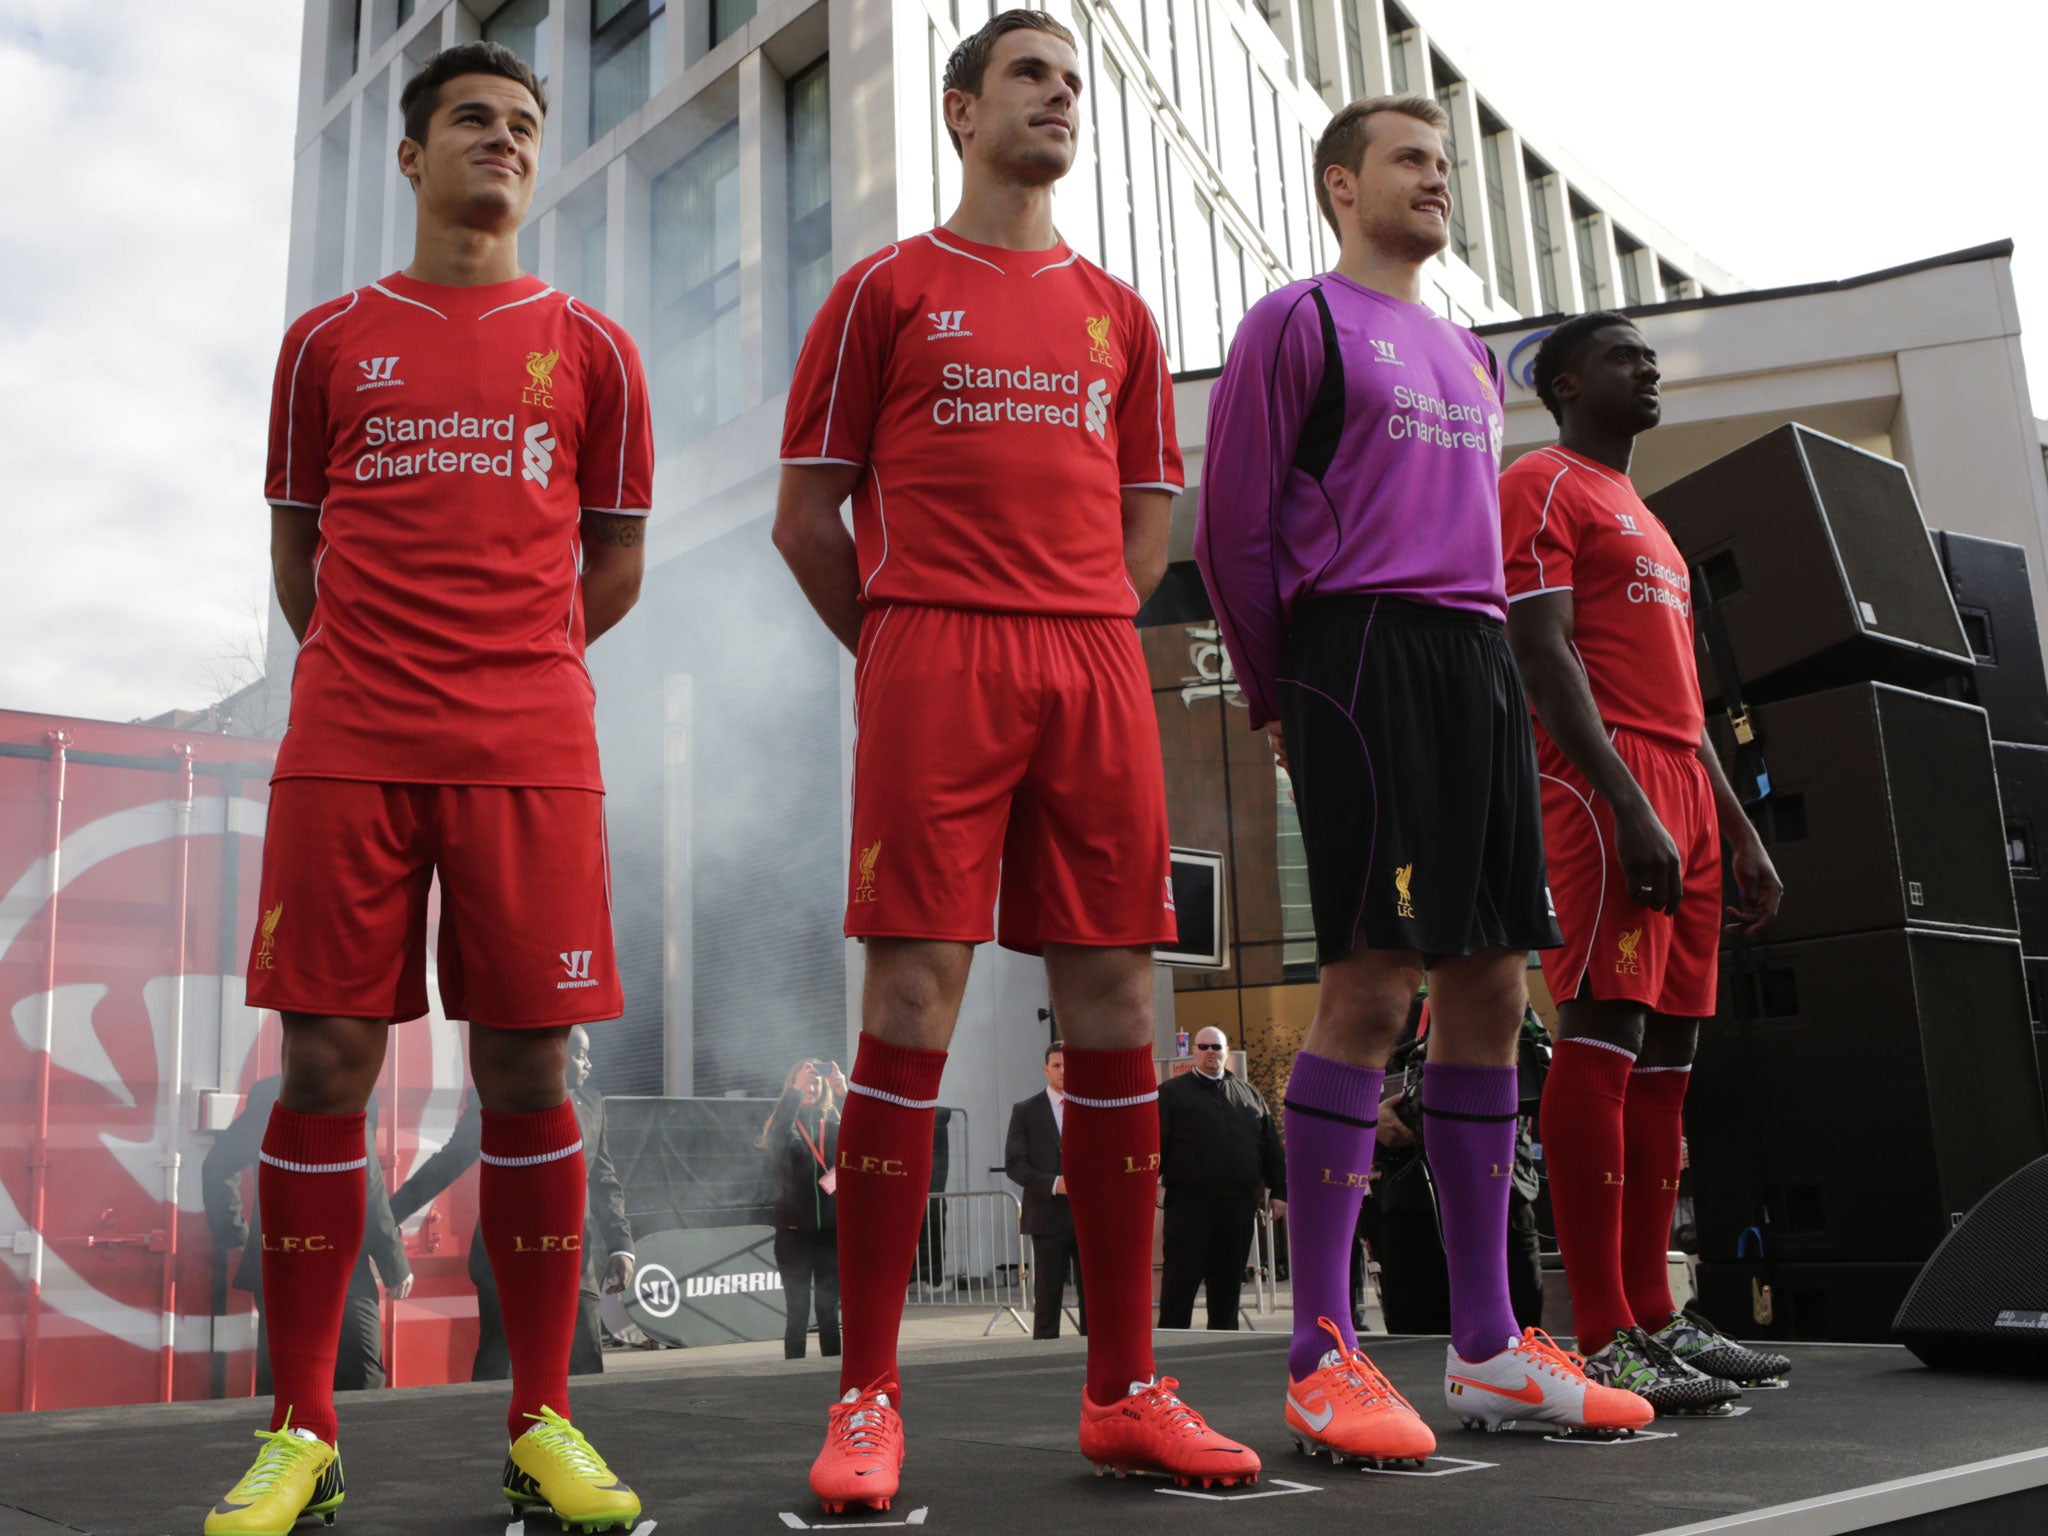 Kolo Toure, Simon Mignolet, Philippe Coutinho and Jordan Henderson revealed the 2014/15 Liverpool FC kit at Liverpool FC and Warrior’s very-first live kit reveal